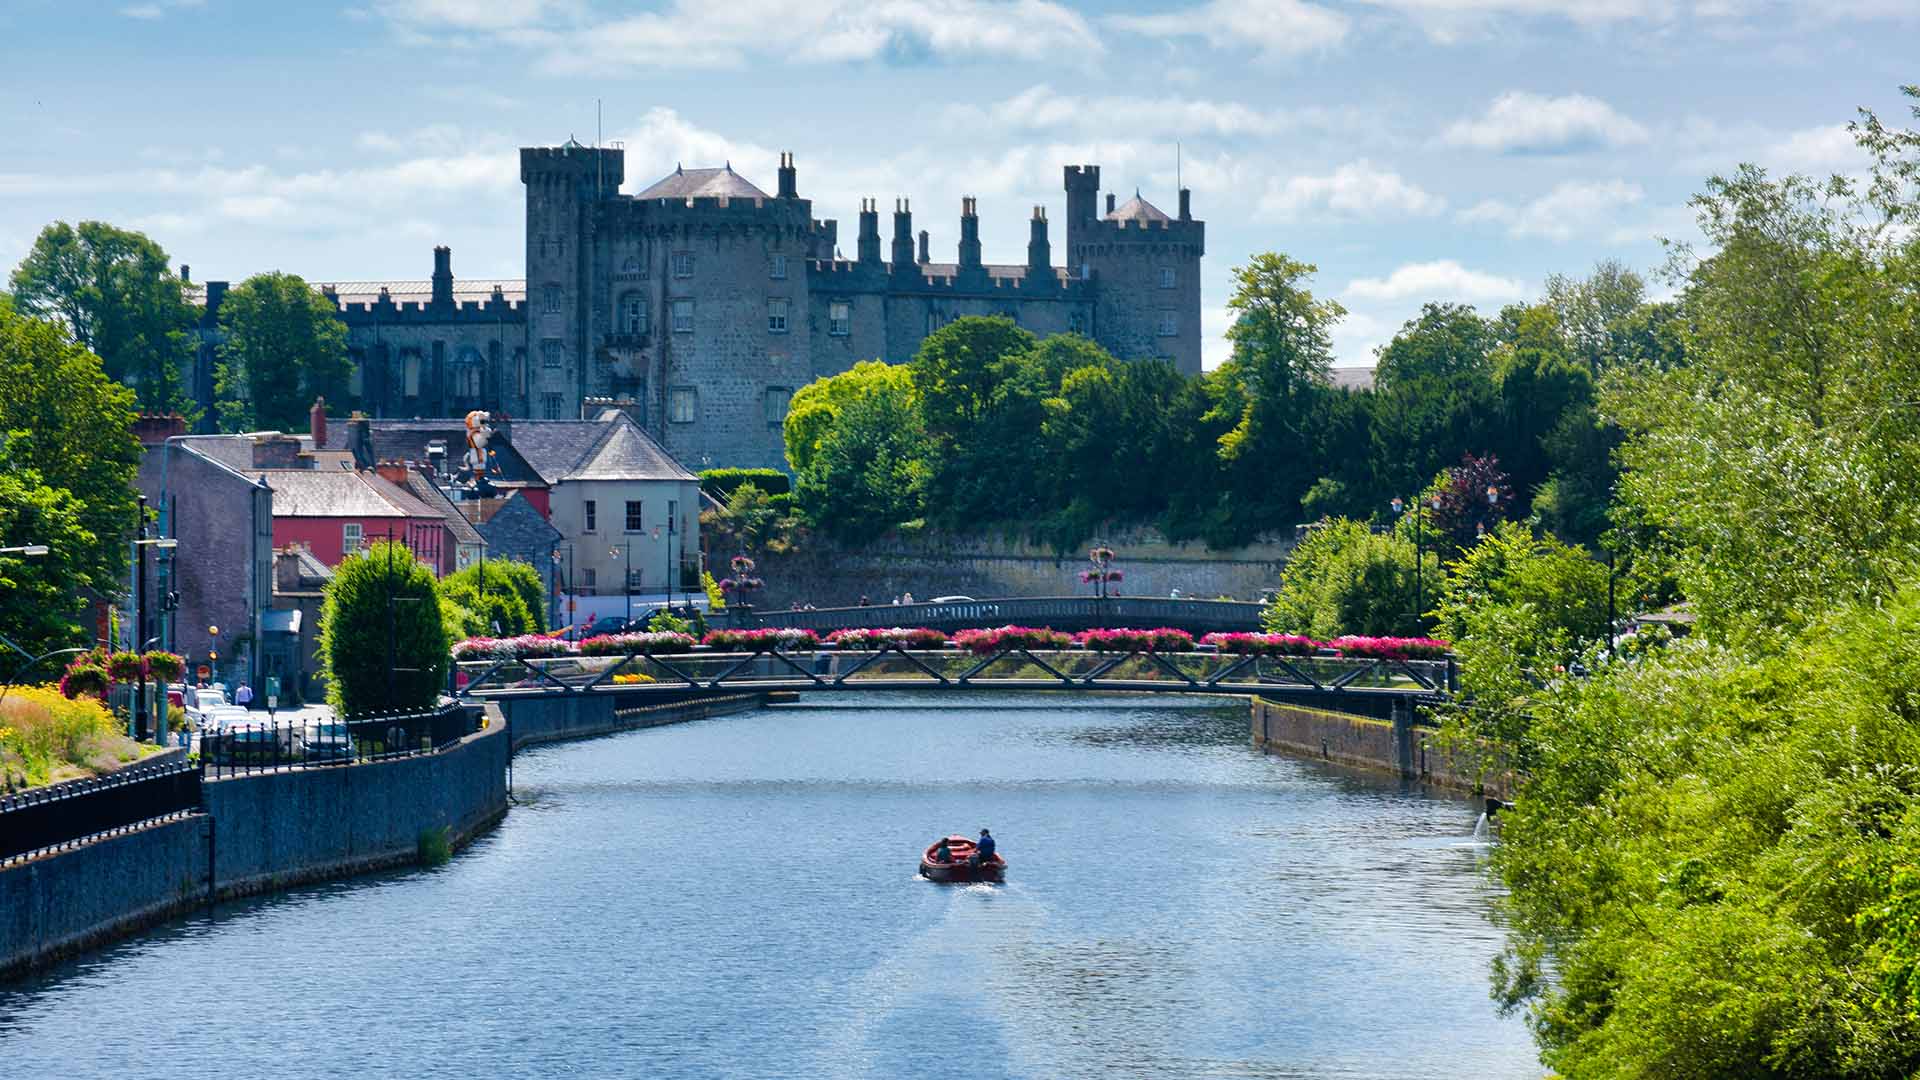 Kilkenny castle with view of the town and river